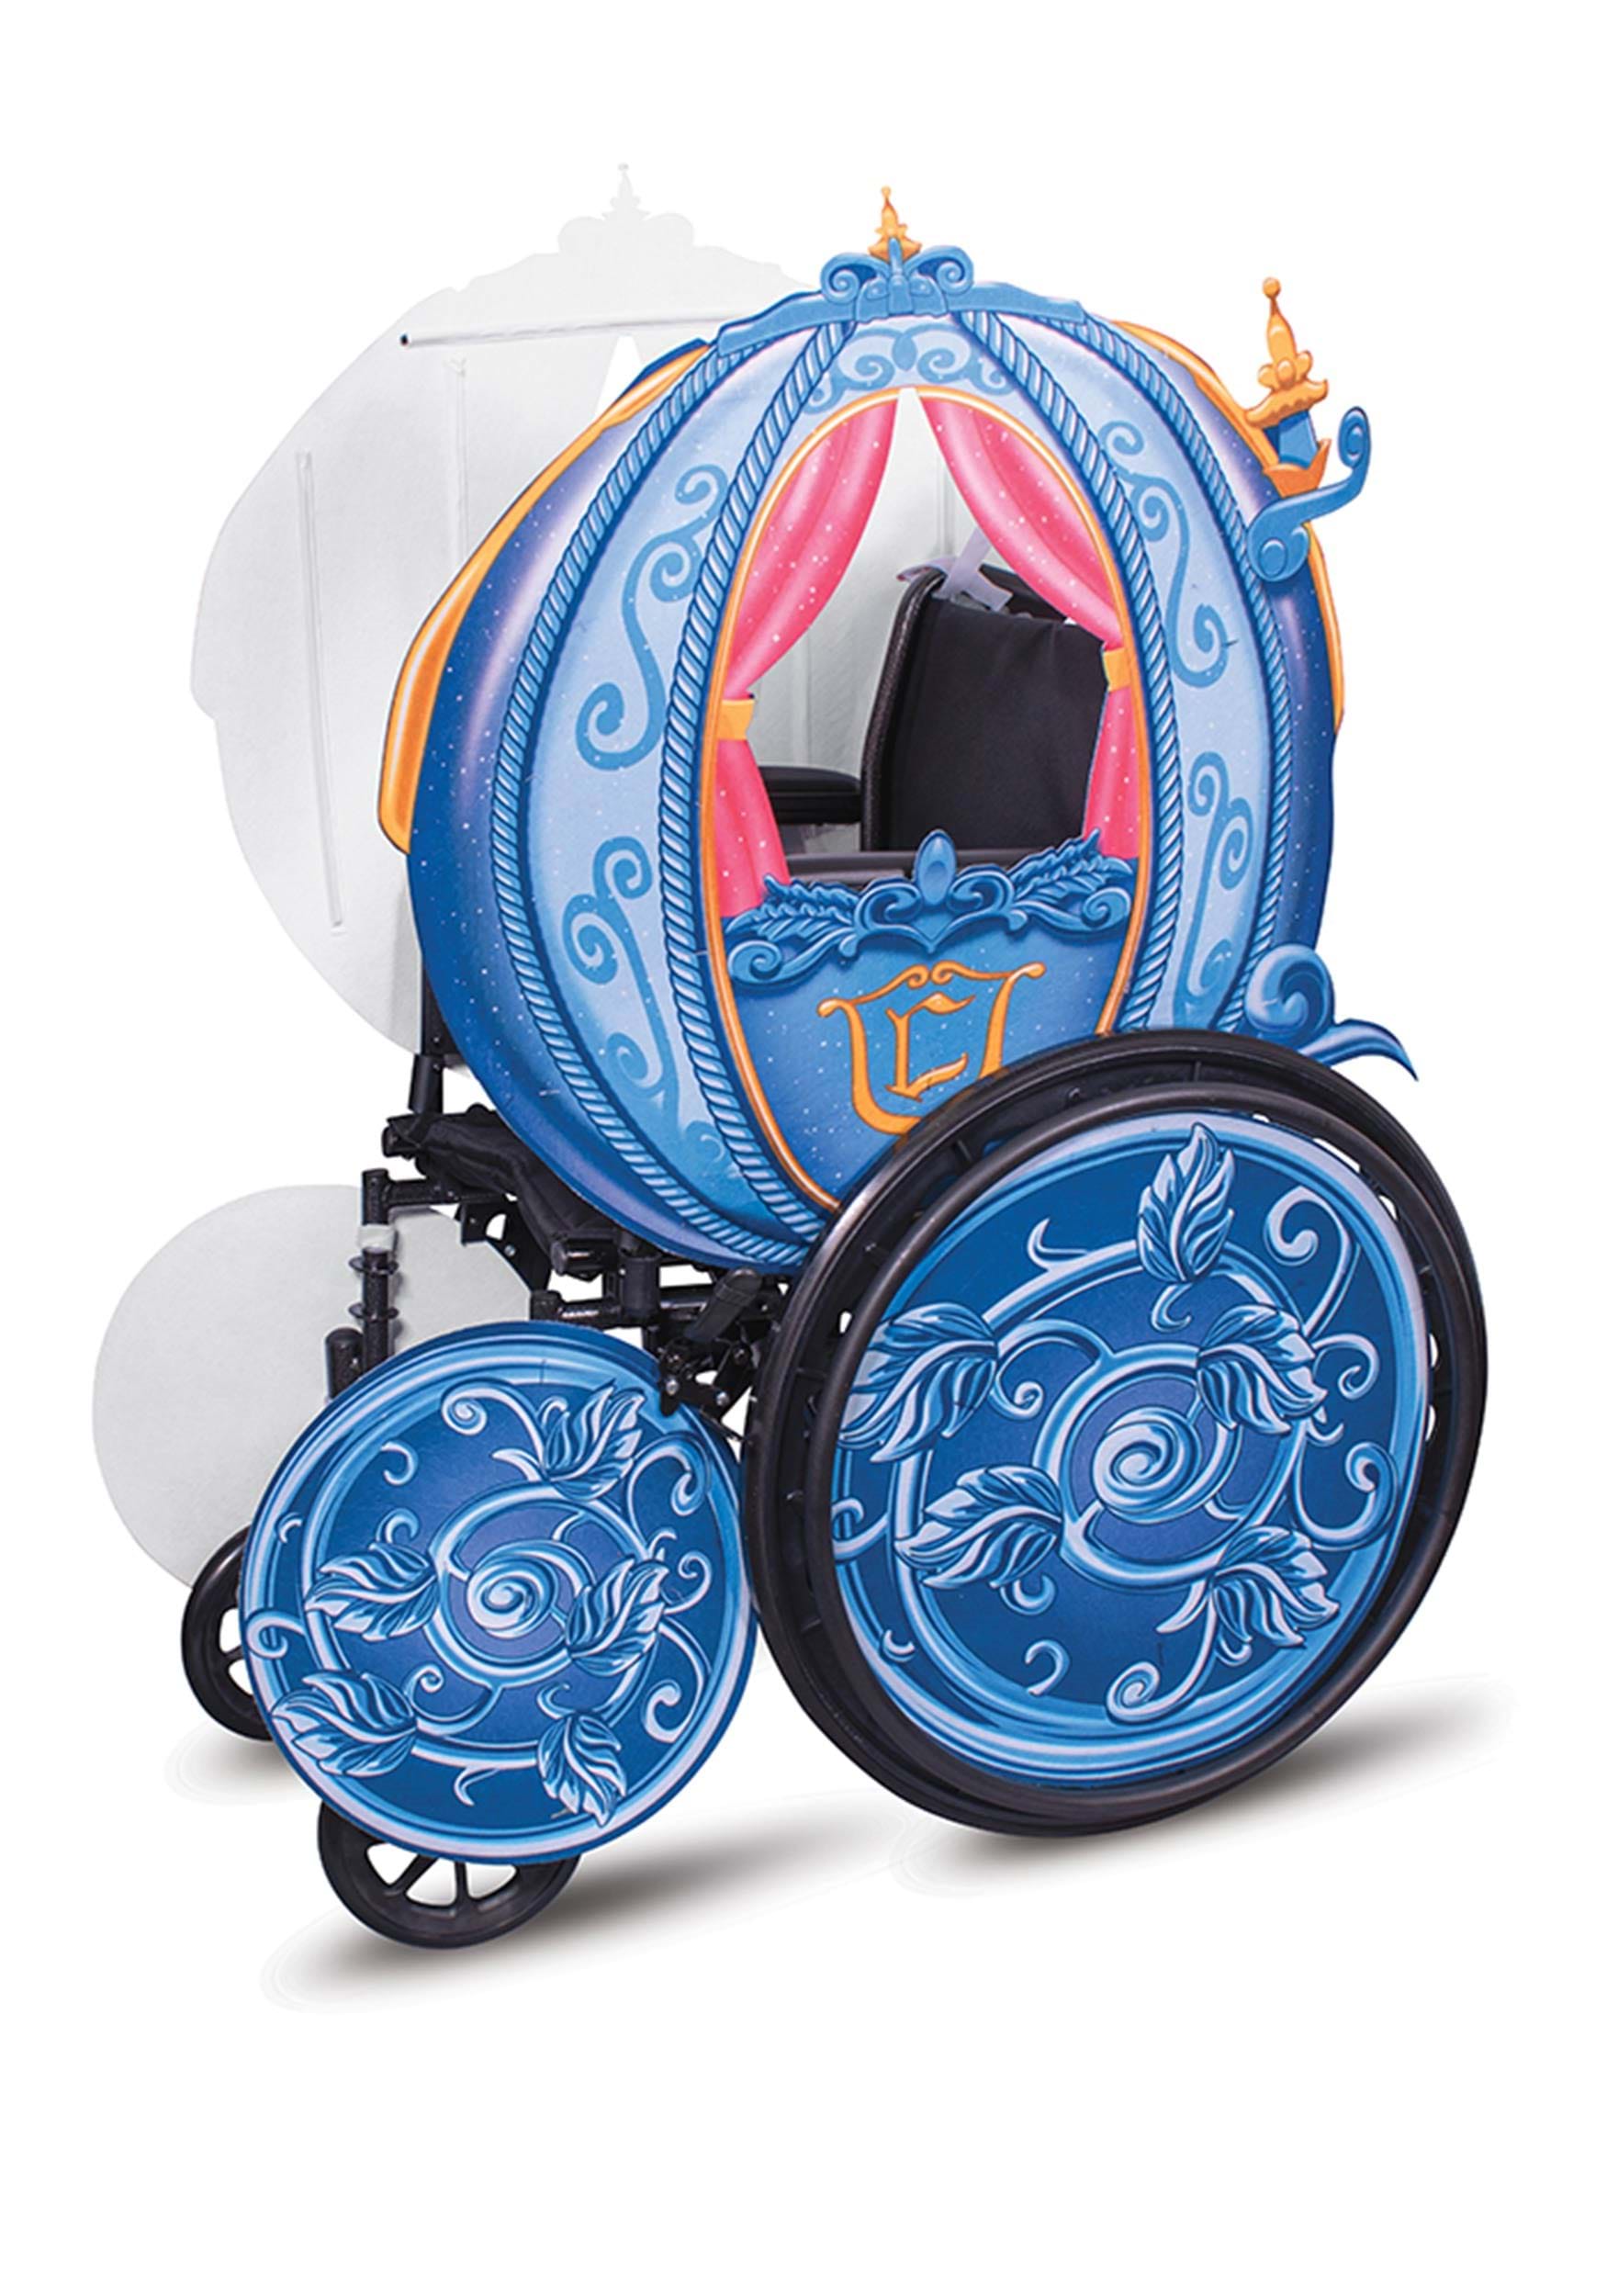 Disguise Girls' Disney Princess Adaptive Wheelchair Cover - image 3 of 8